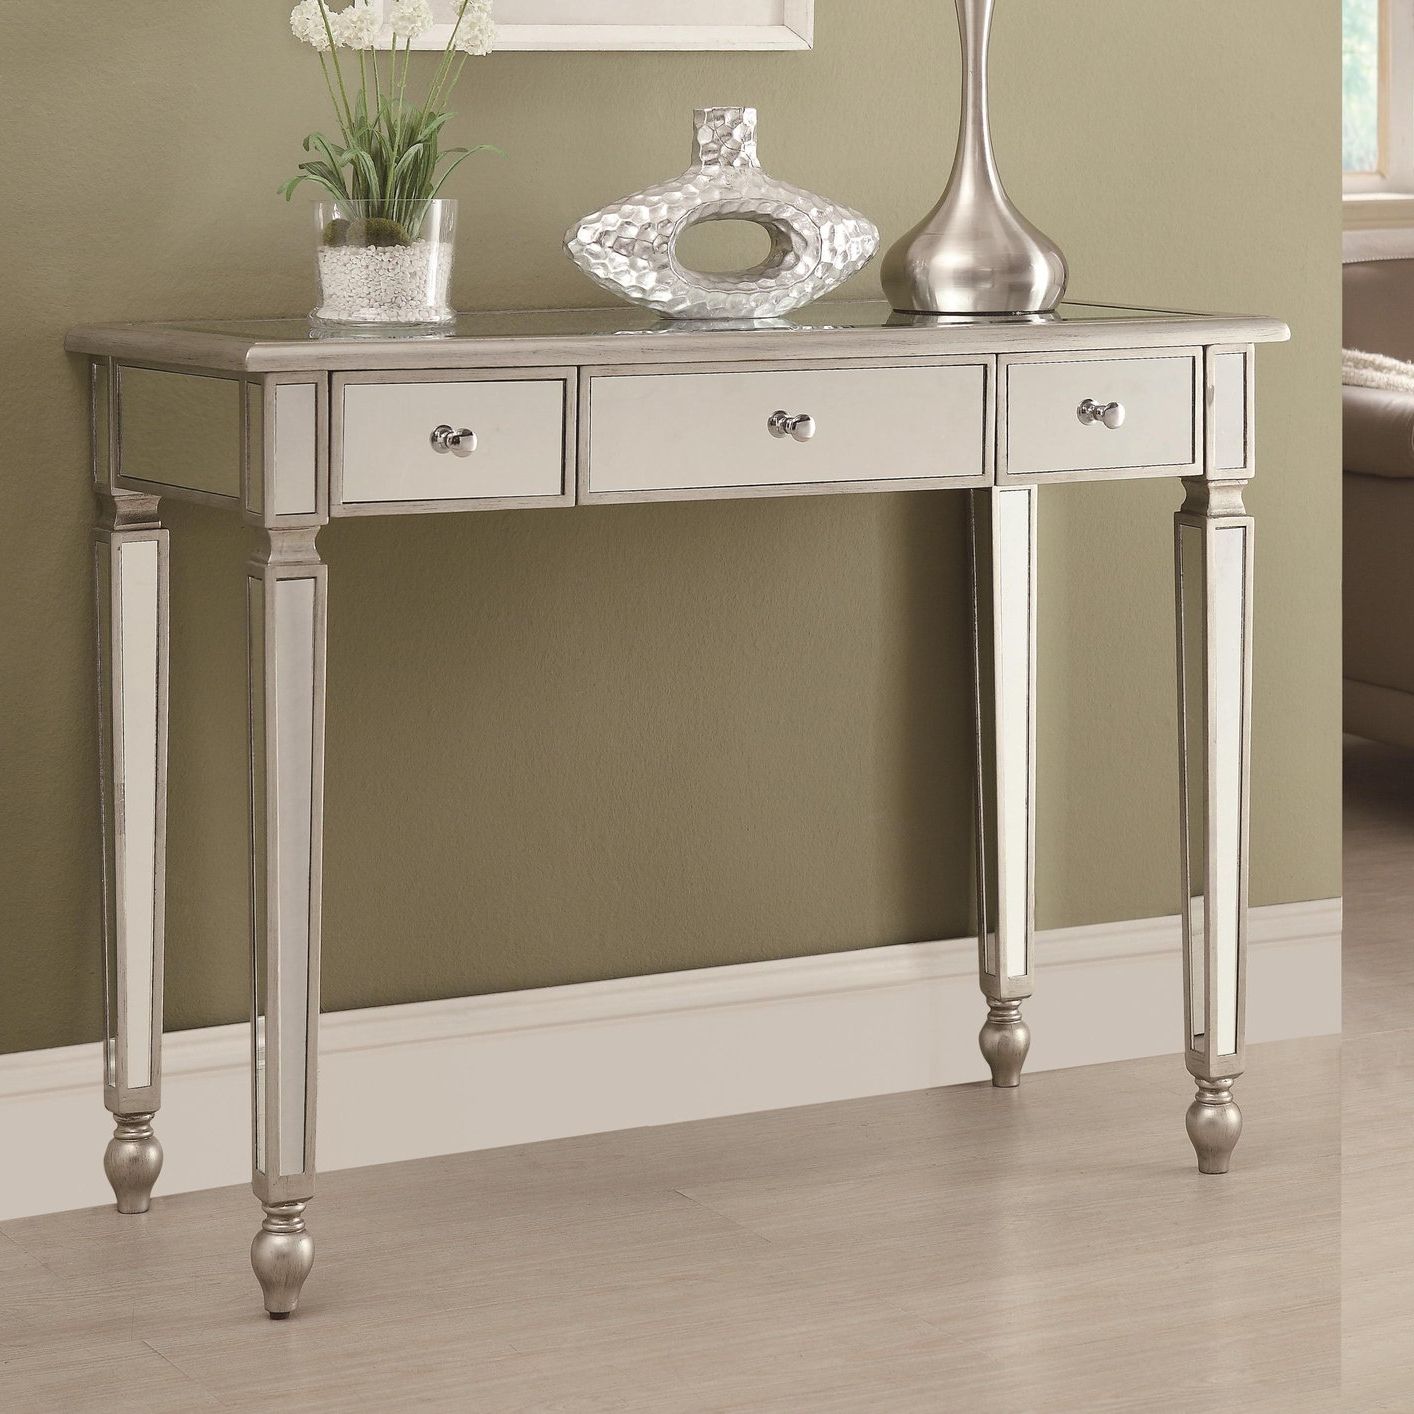 Silver Metal Console Table – Steal A Sofa Furniture Outlet Within Best And Newest Antique Silver Aluminum Coffee Tables (View 13 of 20)